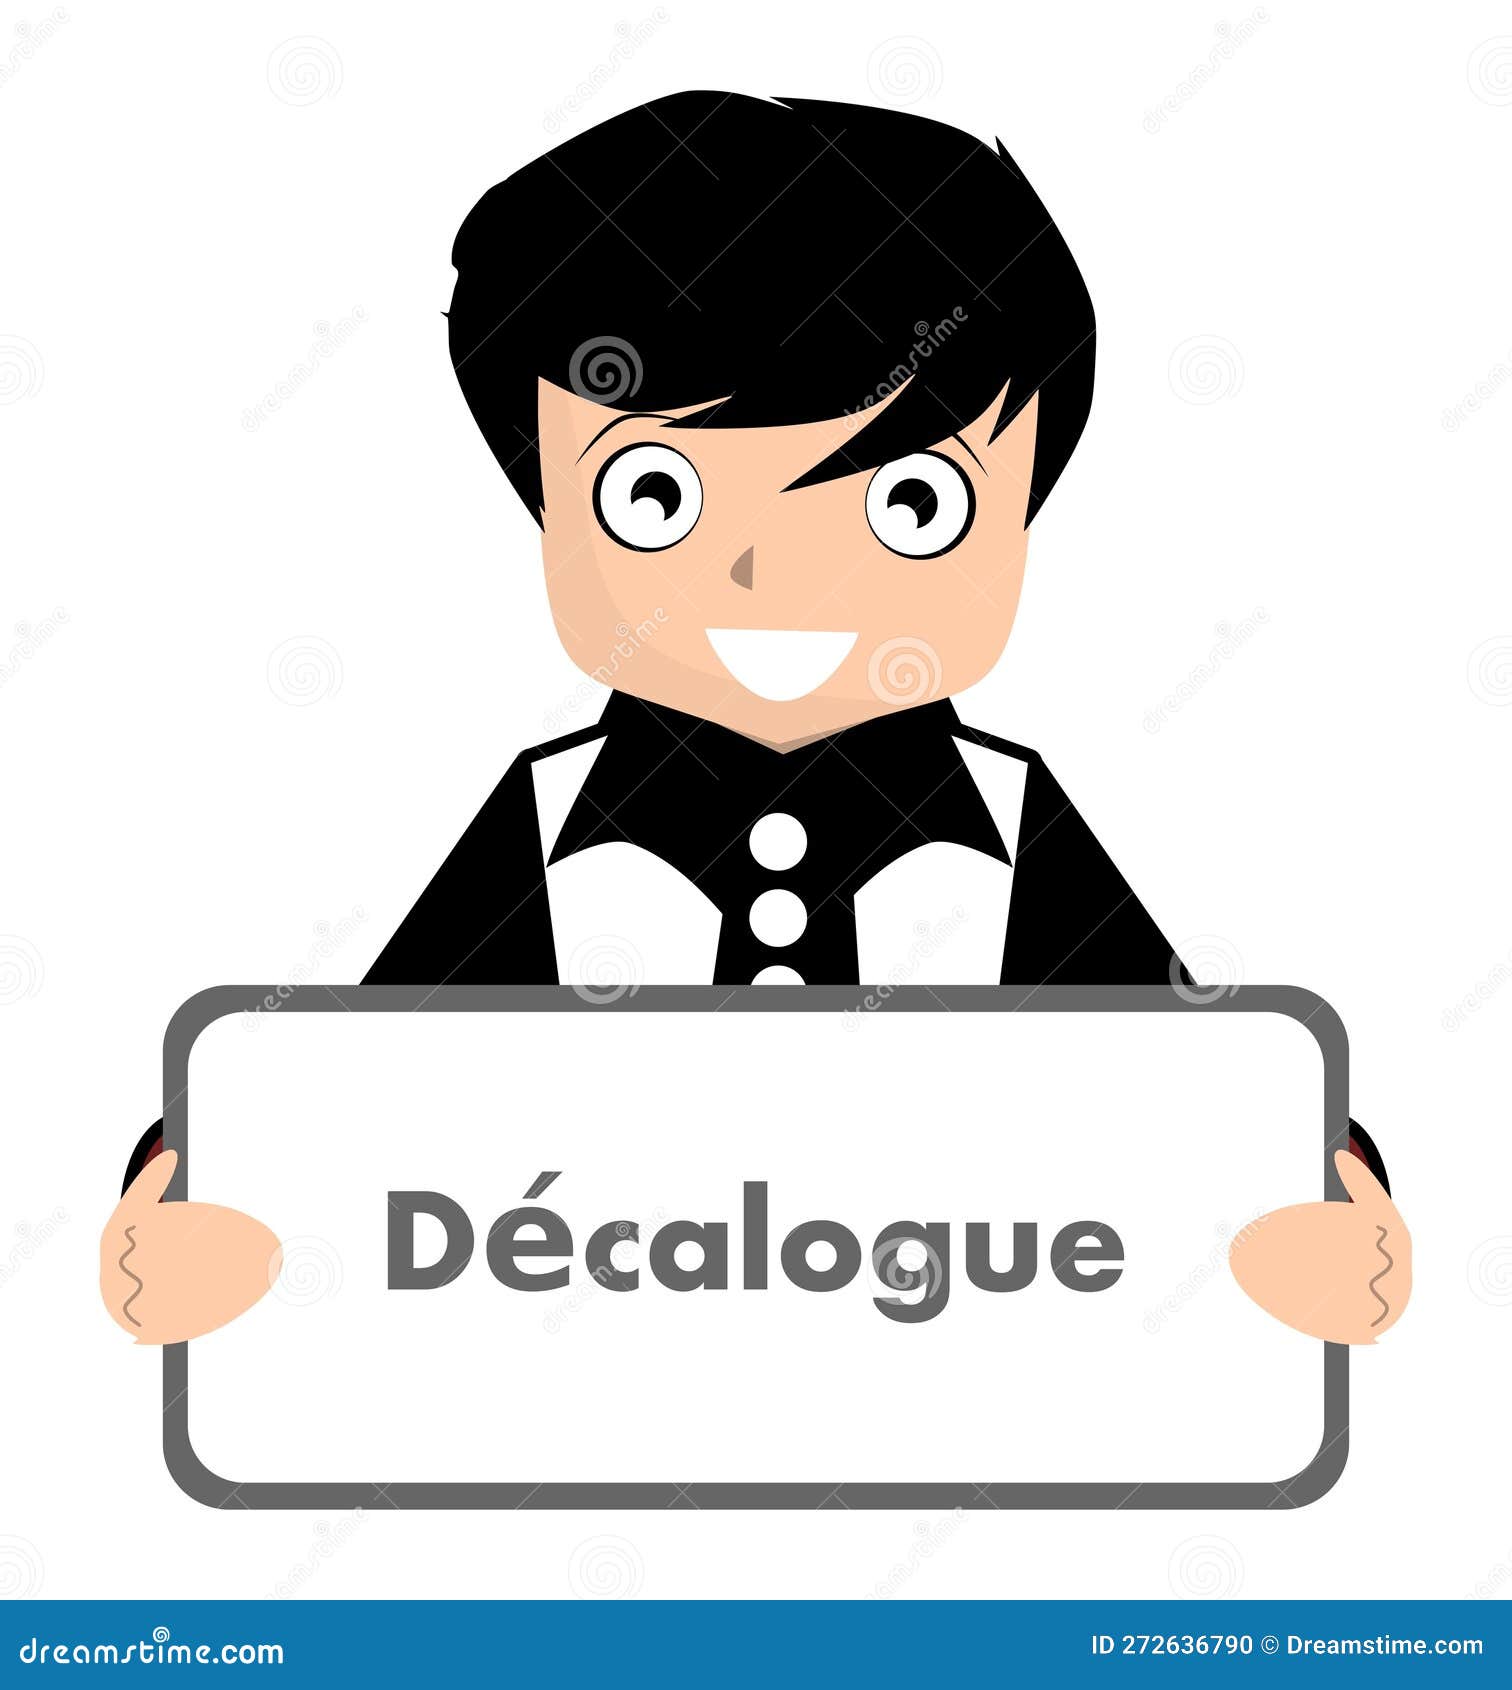 boy with decalogue sign, french, rules, .